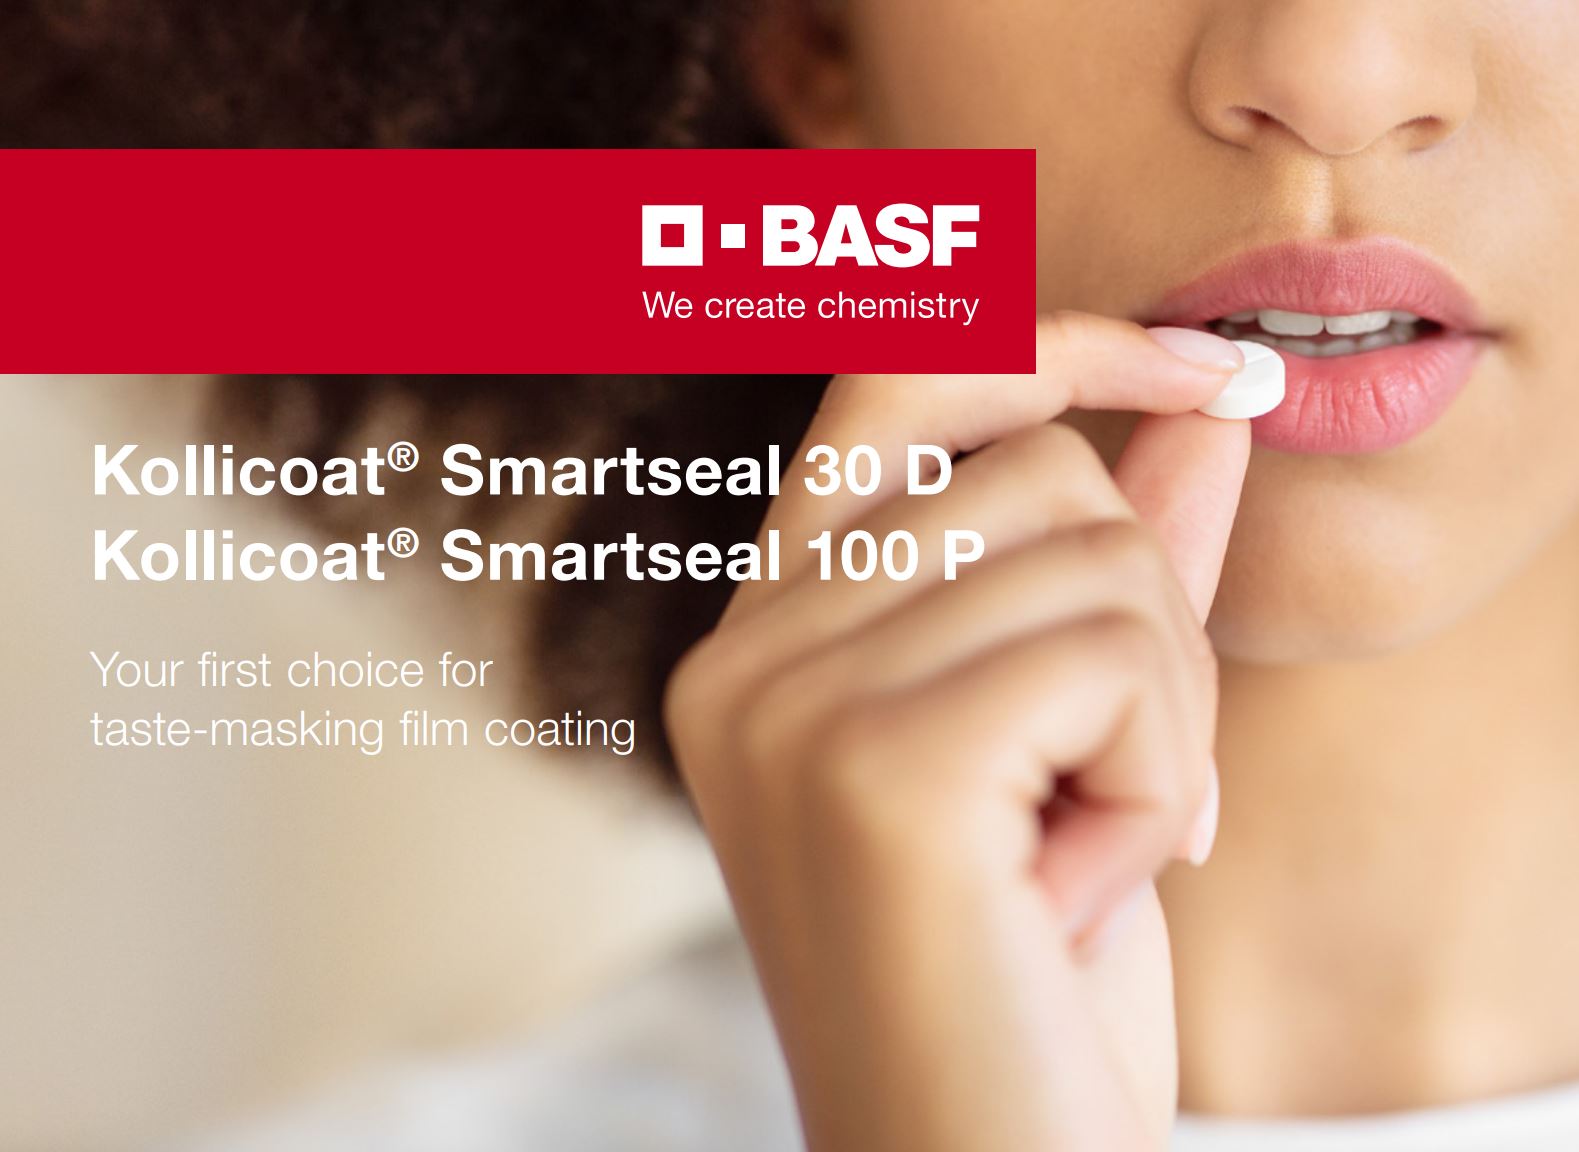 Kollicoat® Smartseal combines an effective taste-masking functionality with efficient processing